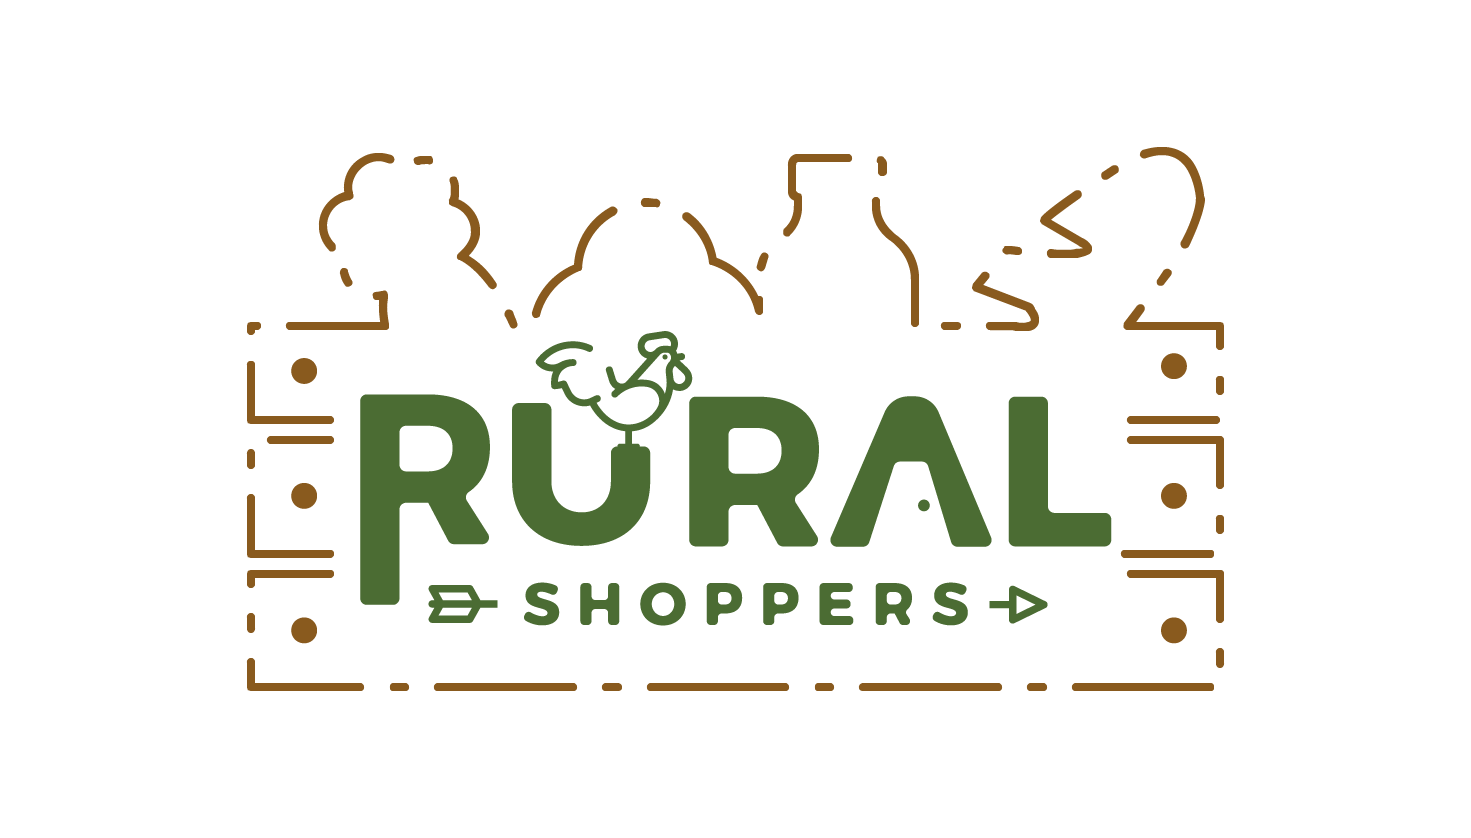 Rural shoppers